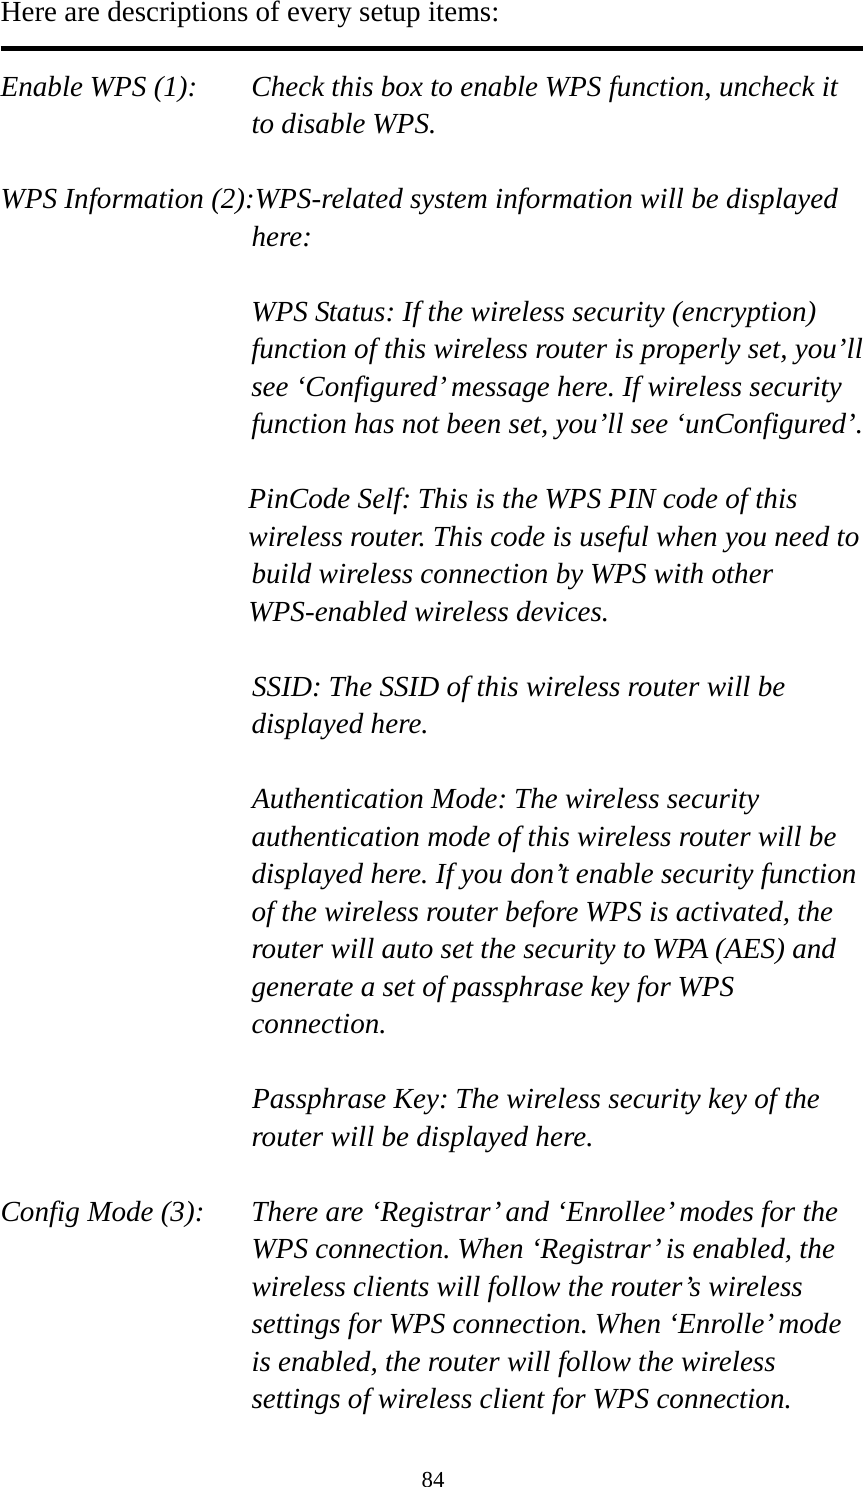 84 Here are descriptions of every setup items:  Enable WPS (1):  Check this box to enable WPS function, uncheck it to disable WPS.  WPS Information (2):WPS-related system information will be displayed here:  WPS Status: If the wireless security (encryption) function of this wireless router is properly set, you’ll see ‘Configured’ message here. If wireless security function has not been set, you’ll see ‘unConfigured’.  PinCode Self: This is the WPS PIN code of this wireless router. This code is useful when you need to  build wireless connection by WPS with other WPS-enabled wireless devices.  SSID: The SSID of this wireless router will be displayed here.  Authentication Mode: The wireless security authentication mode of this wireless router will be displayed here. If you don’t enable security function of the wireless router before WPS is activated, the router will auto set the security to WPA (AES) and generate a set of passphrase key for WPS connection.  Passphrase Key: The wireless security key of the router will be displayed here.  Config Mode (3):  There are ‘Registrar’ and ‘Enrollee’ modes for the WPS connection. When ‘Registrar’ is enabled, the wireless clients will follow the router’s wireless settings for WPS connection. When ‘Enrolle’ mode is enabled, the router will follow the wireless settings of wireless client for WPS connection. 